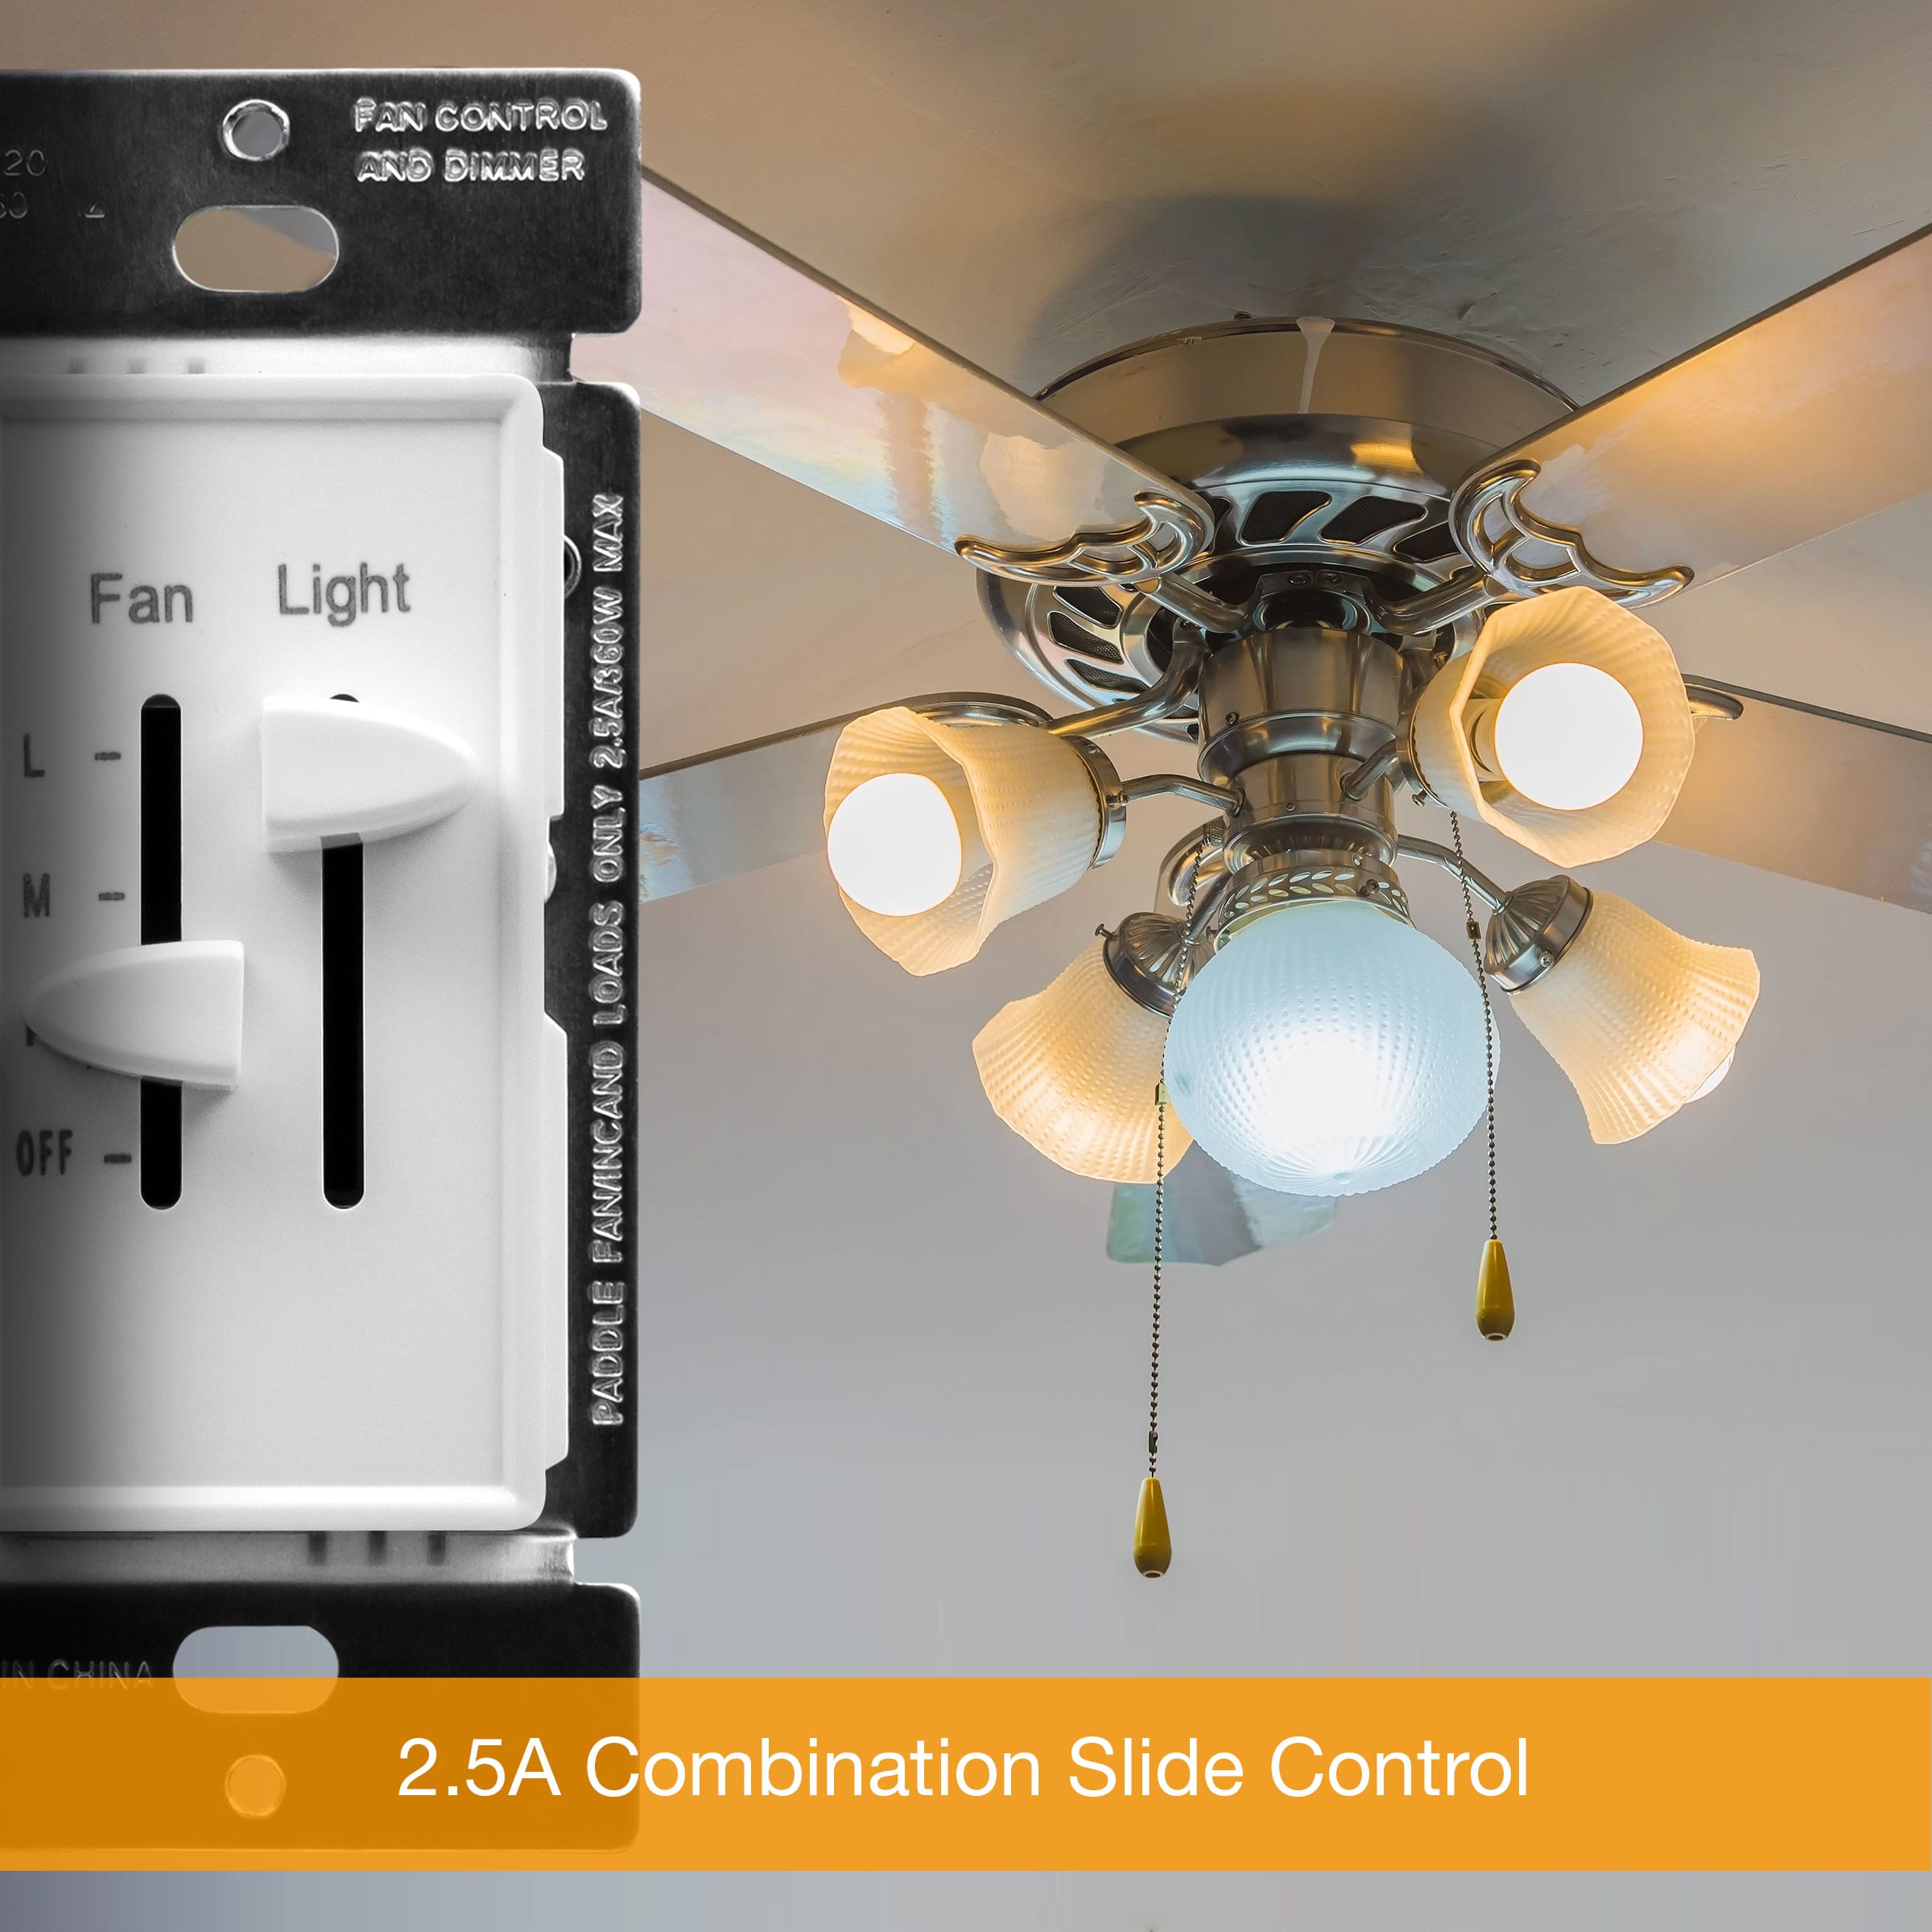 3 Speed Ceiling Fan Control and LED Dimmer Light Switch